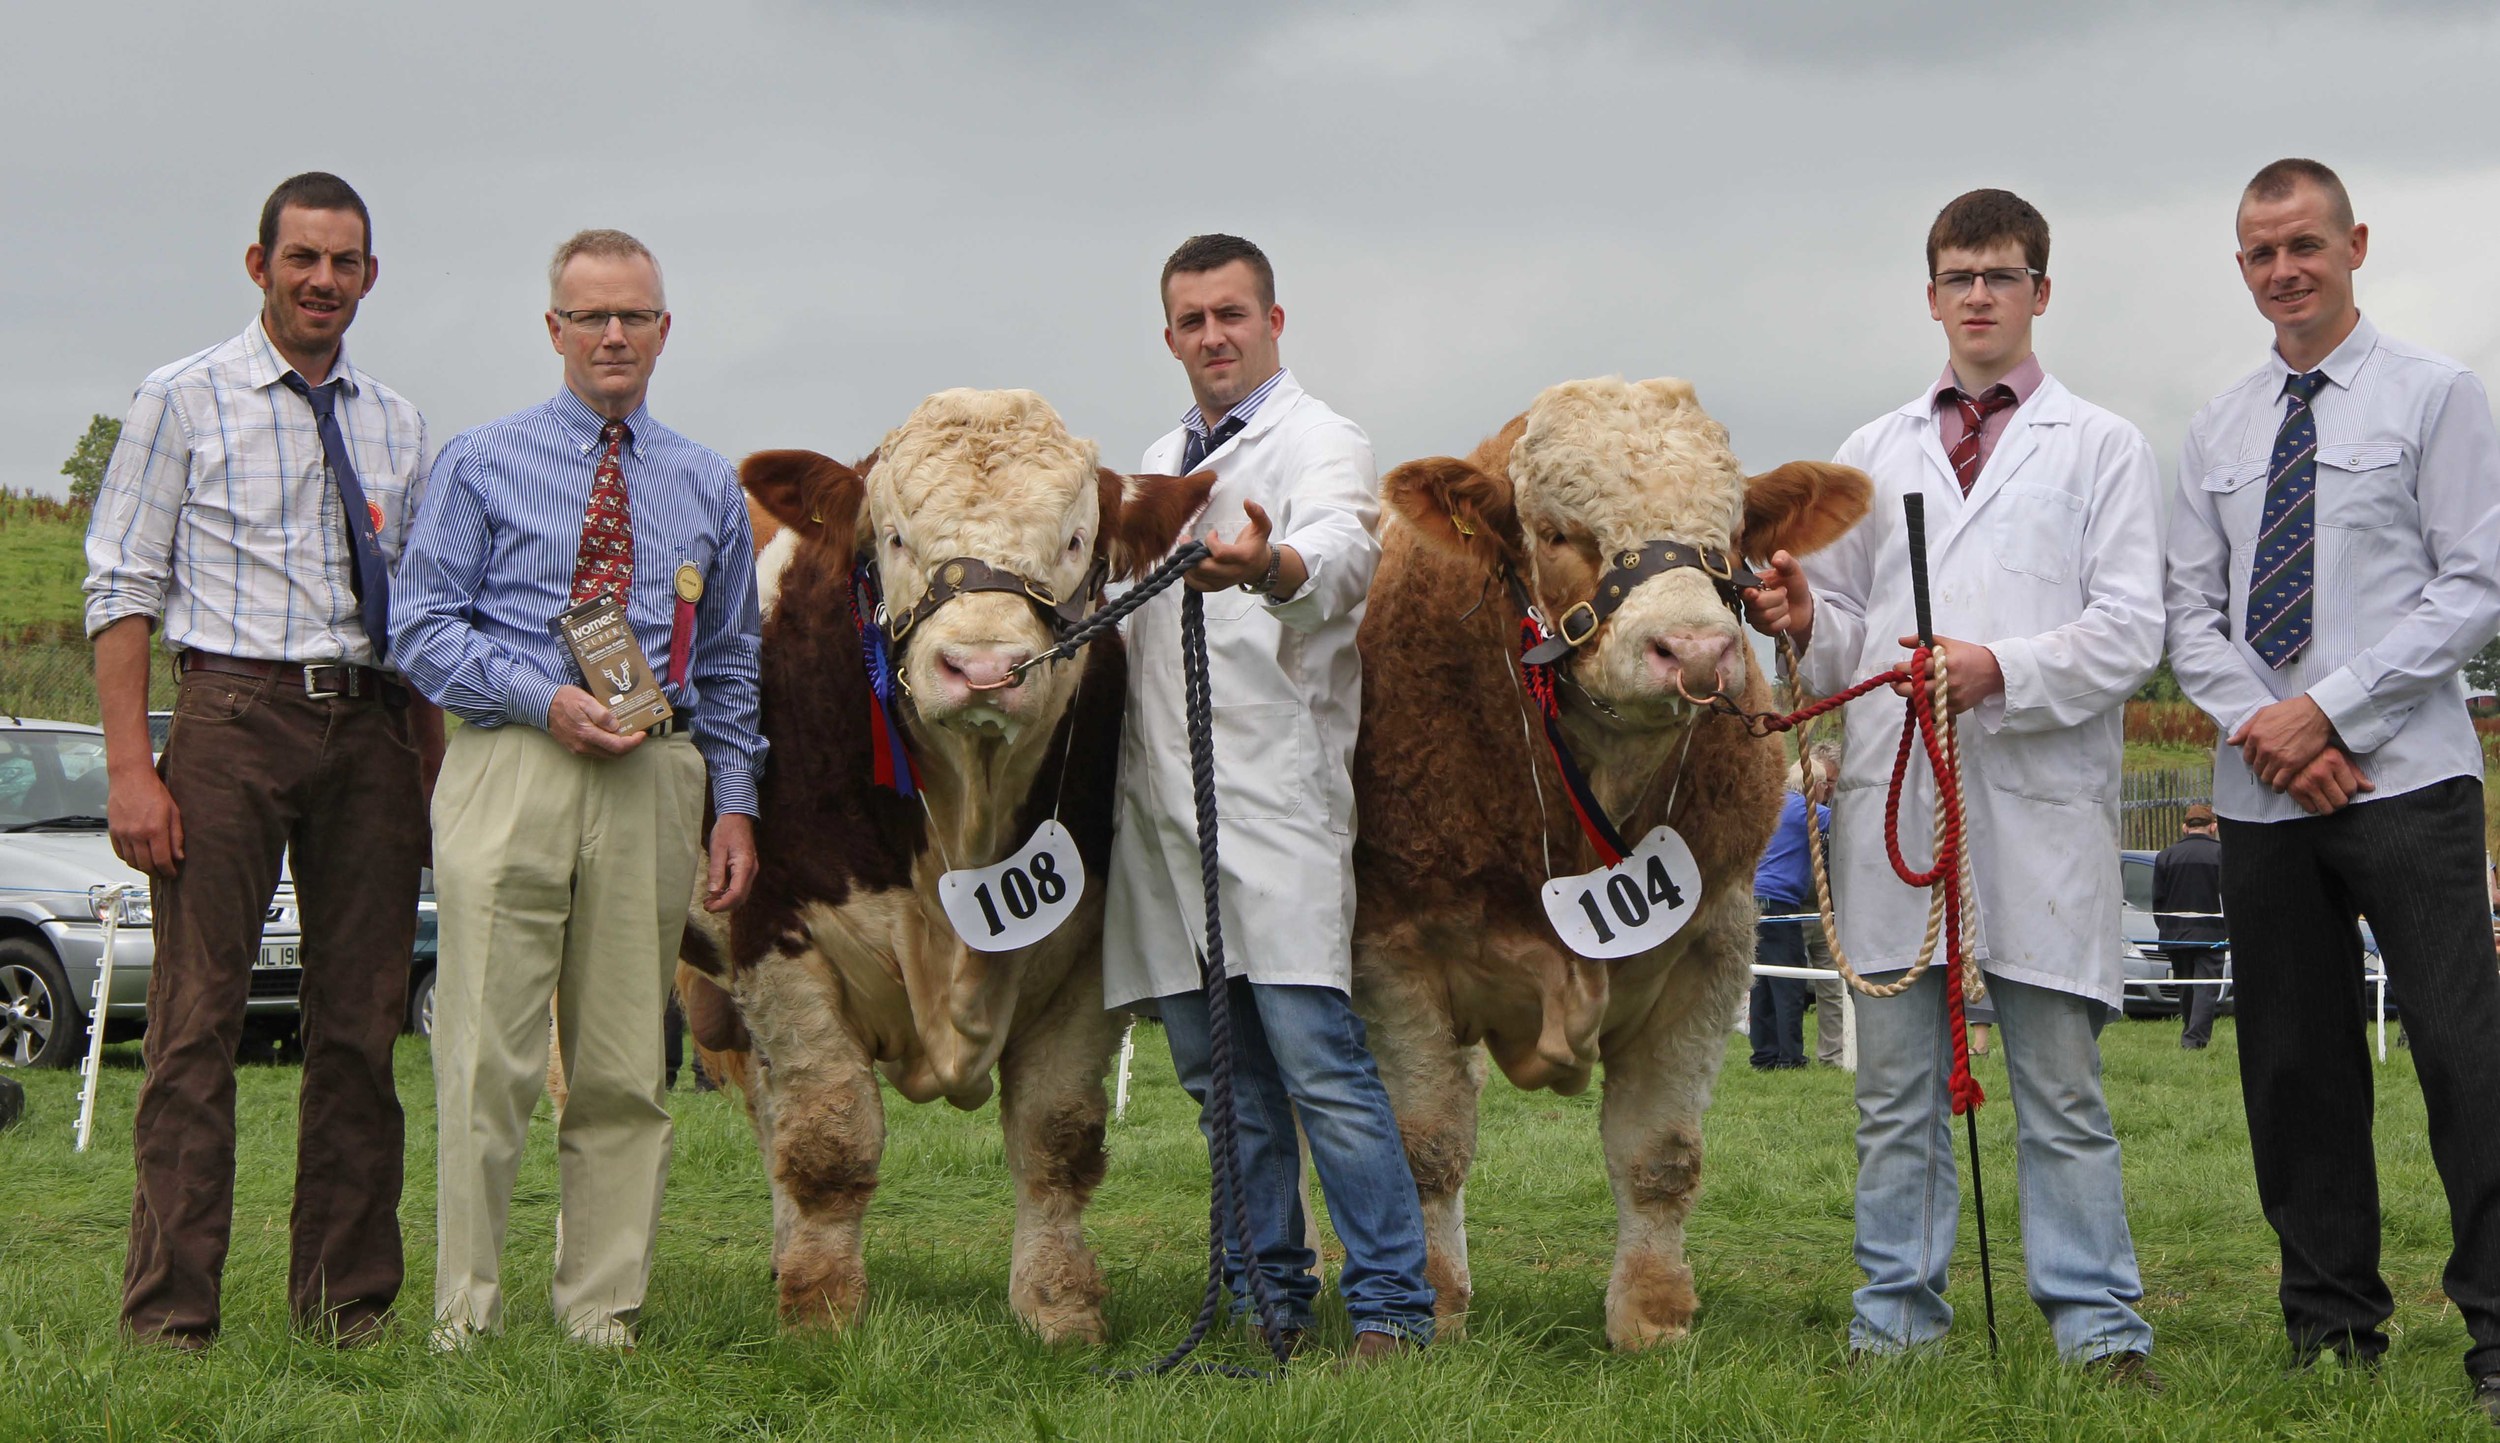 Ivomec Super Simmental Pair of the Year winners were Slievenagh Emperor and Slievenagh Extra Special shown by Christopher and Jamie Boyd, Portglenone. Included are judge Garrett Behan, Portlaoise; Philip Clarke, Merial Animal Health, sponsor; and Richard Rodgers, chairman, NI Simmental Club. 